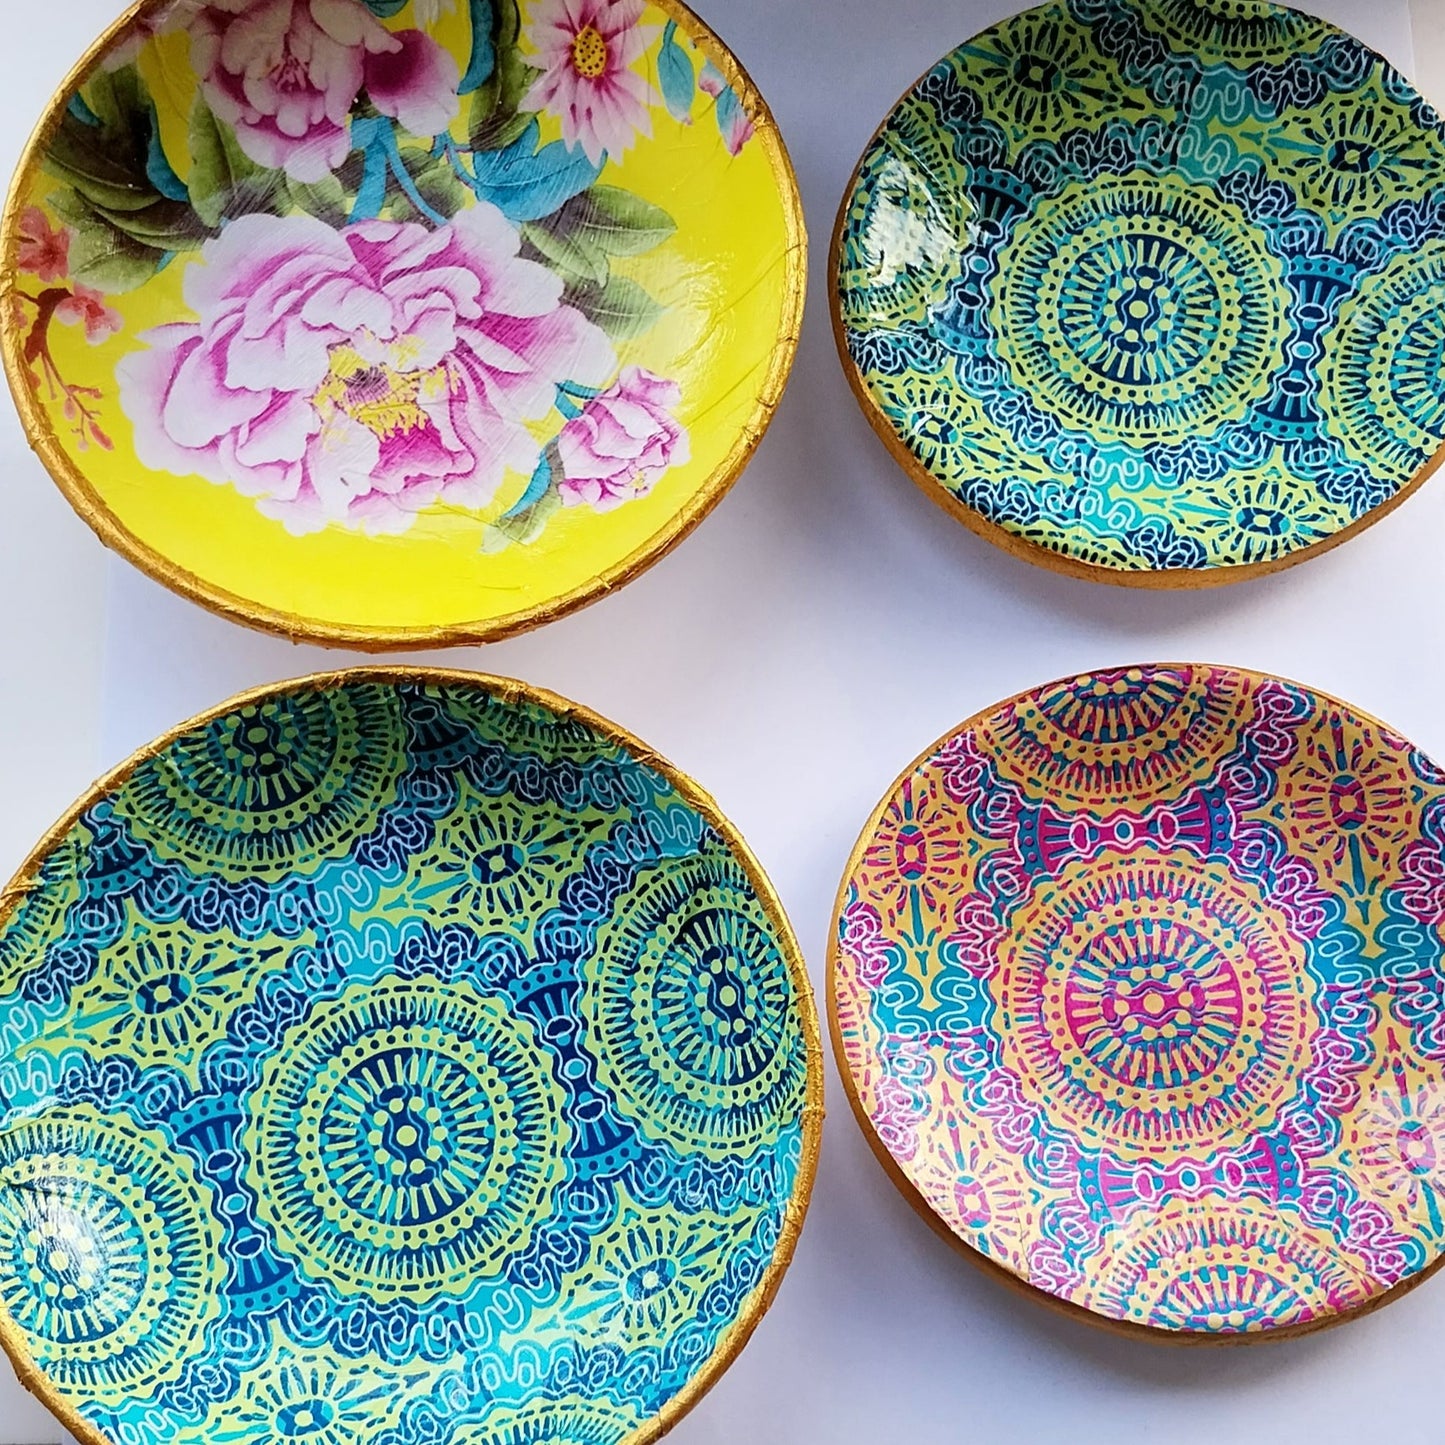 Colourful patterned trinket dishes large and small